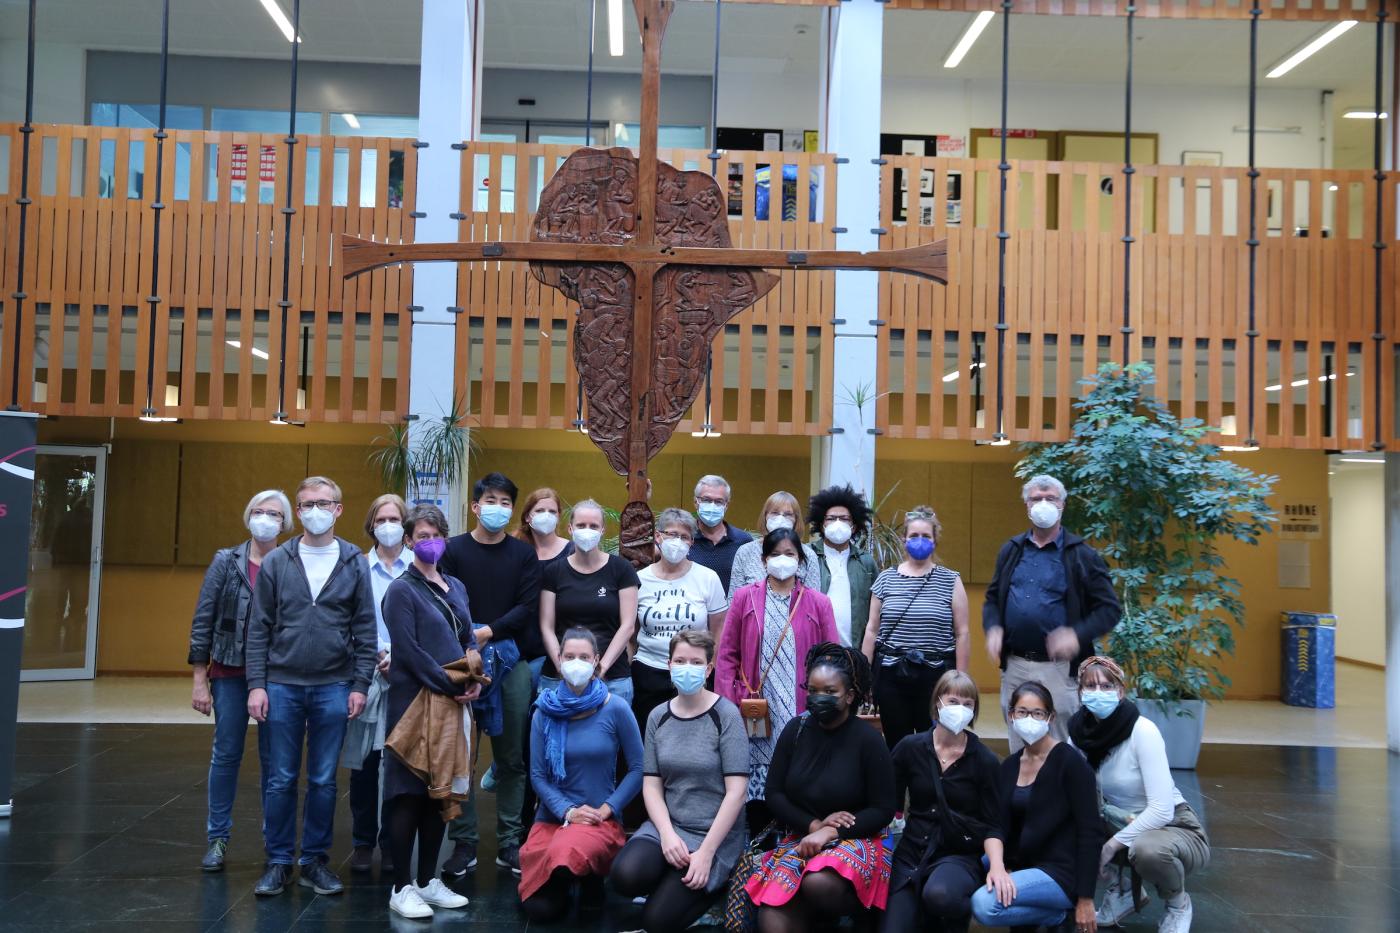 Group posing for a group photo in fronto of a wooden cross, wearing face masks